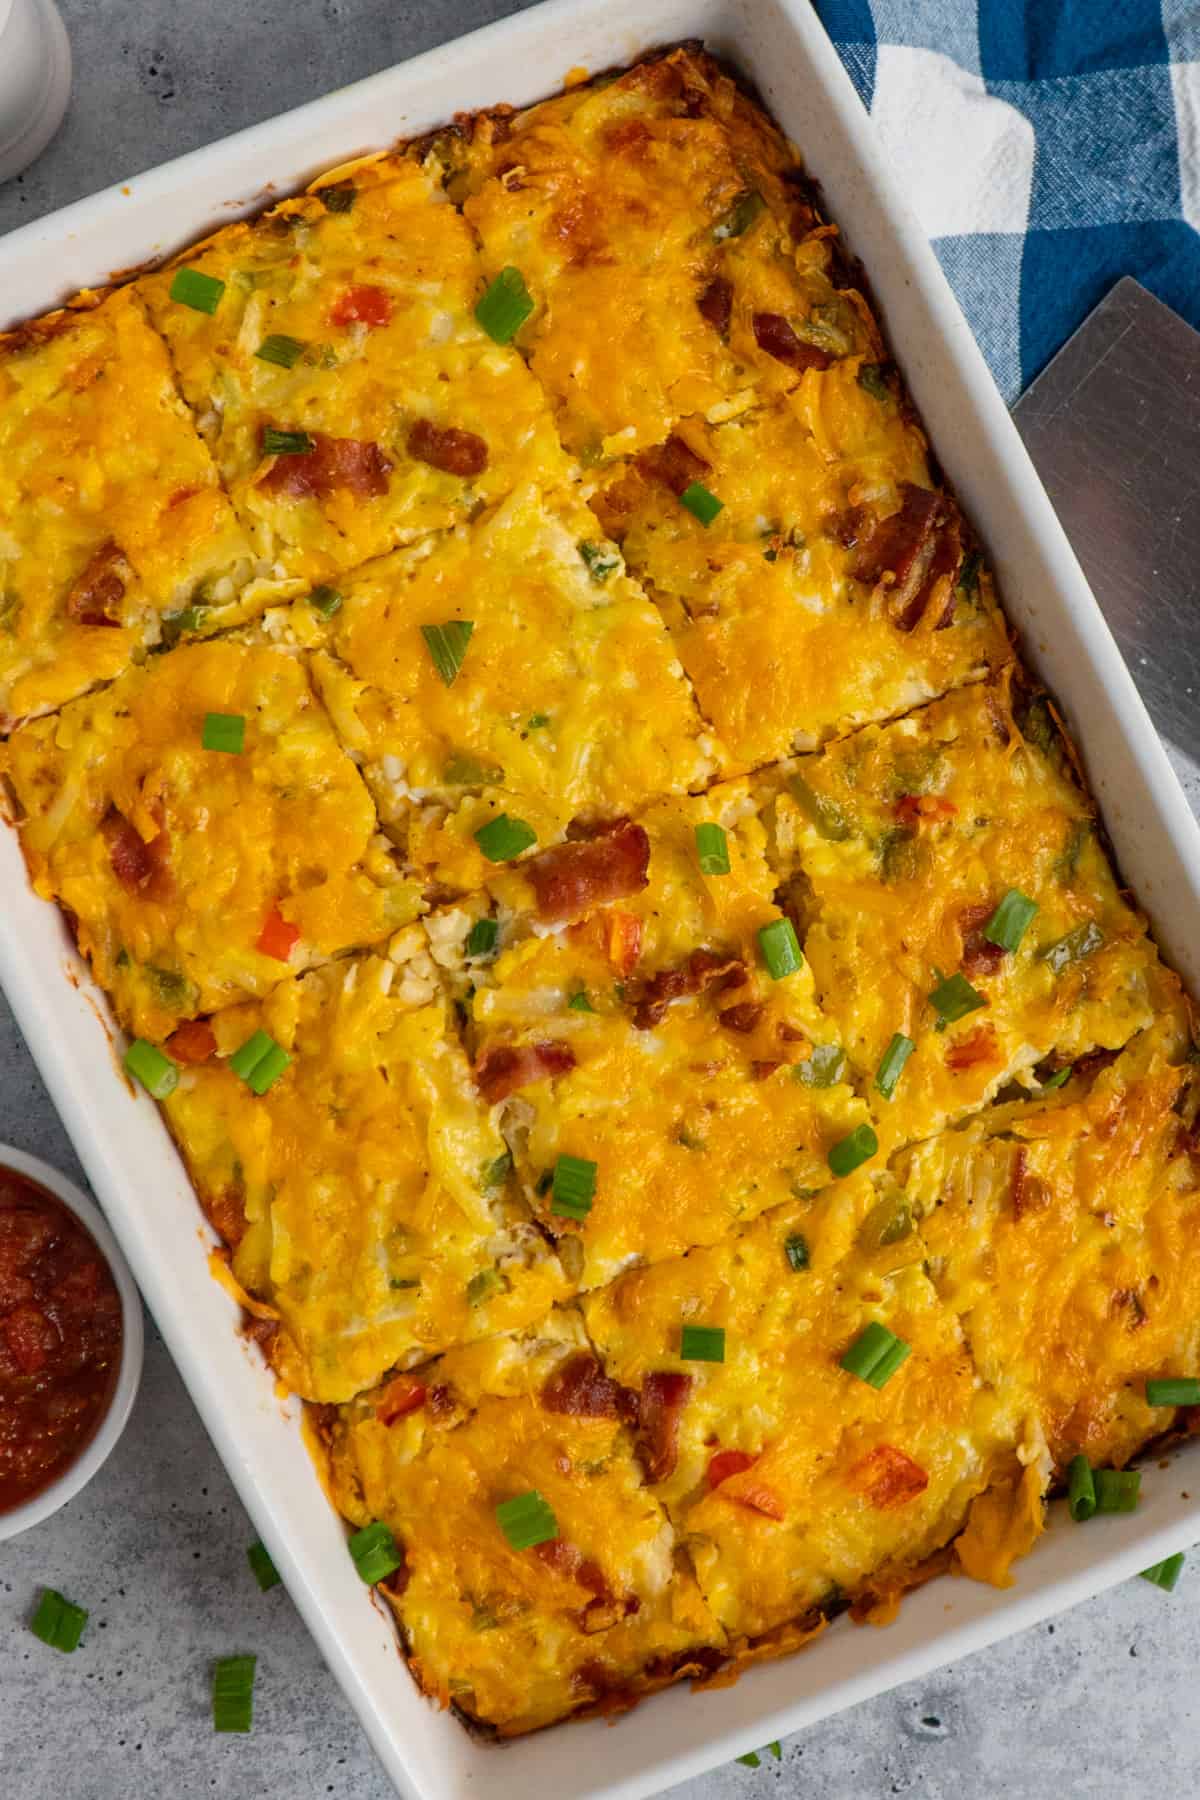 Overhead look at a hashbrown breakfast casserole sliced up in a white baking dish.